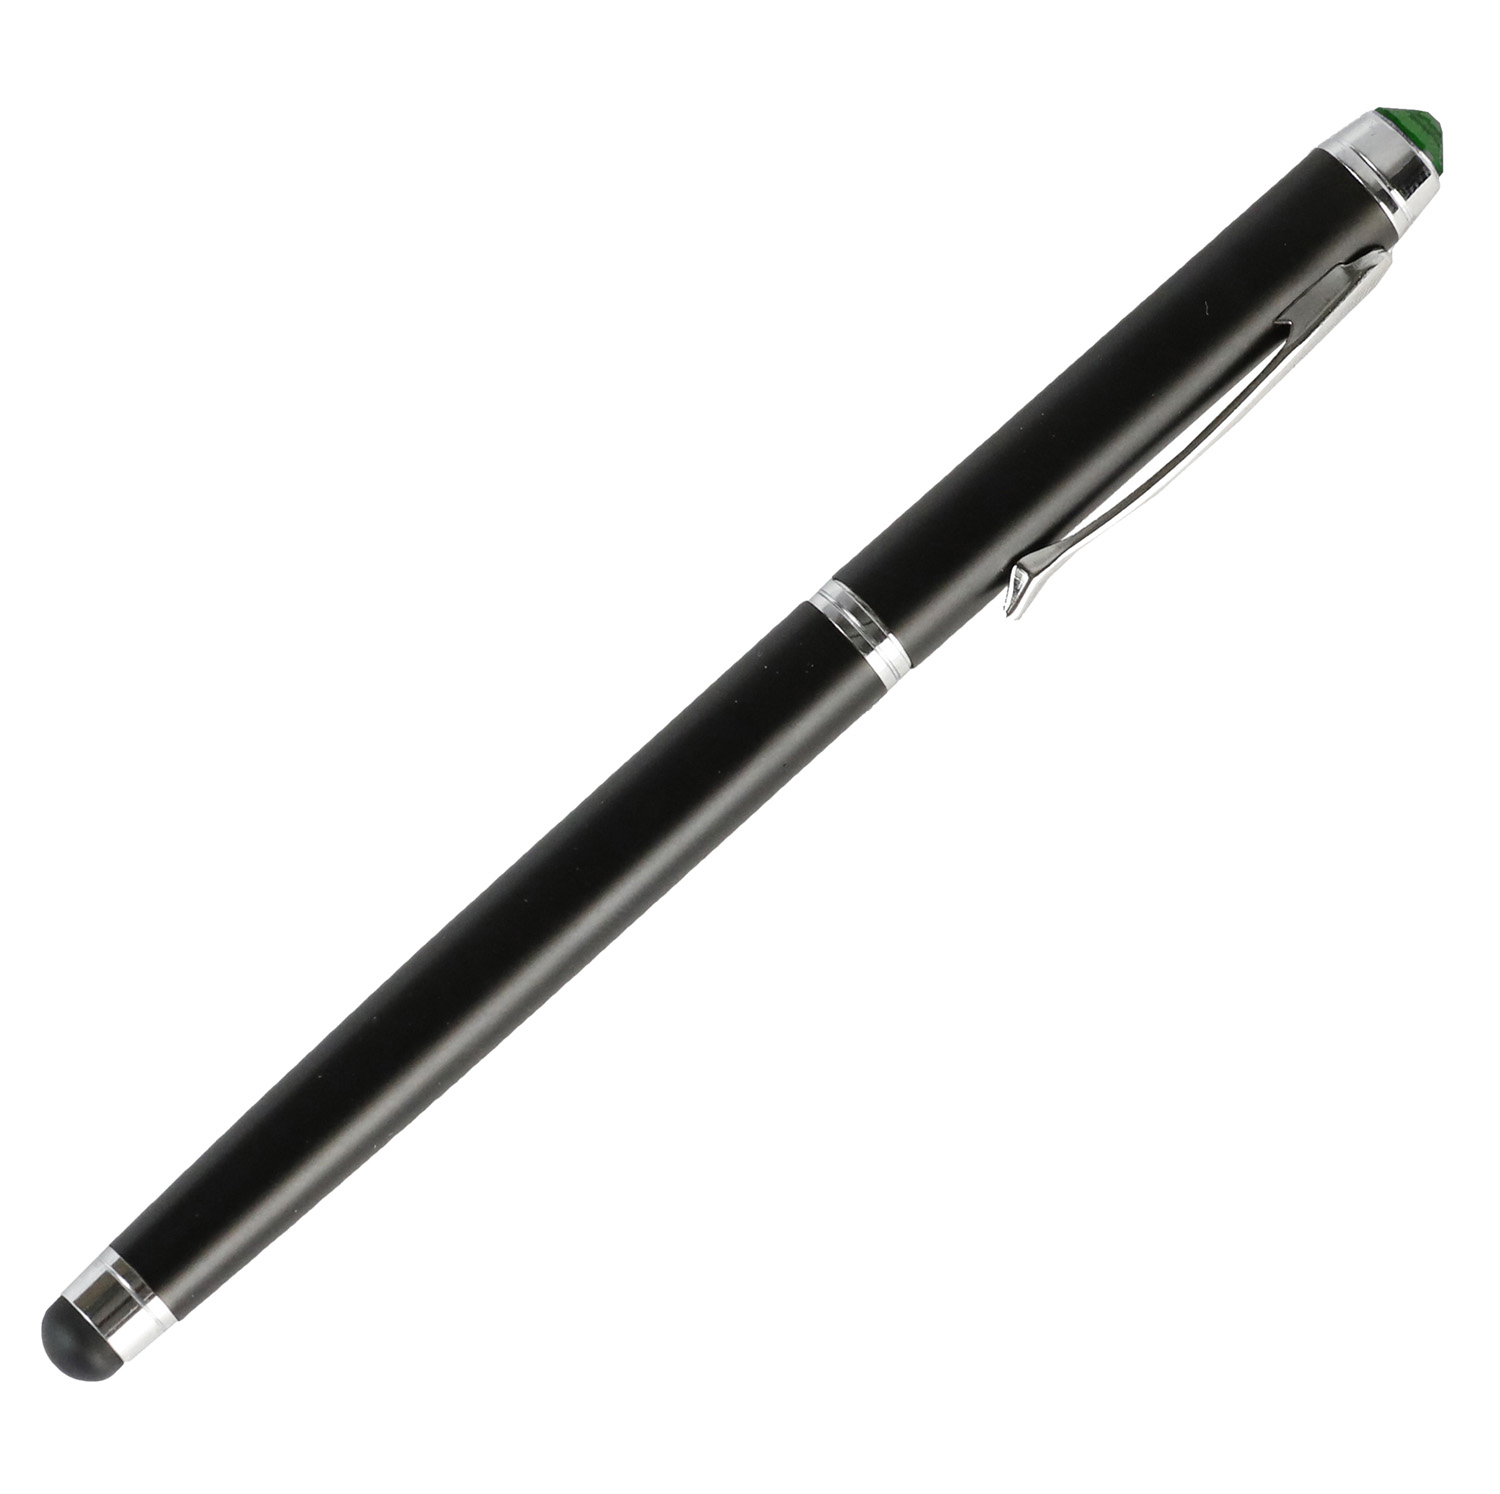 Universal Stylus Pen - Touch Screen with Gem for Iphone Ipad Tablet Smartphones - Emerald